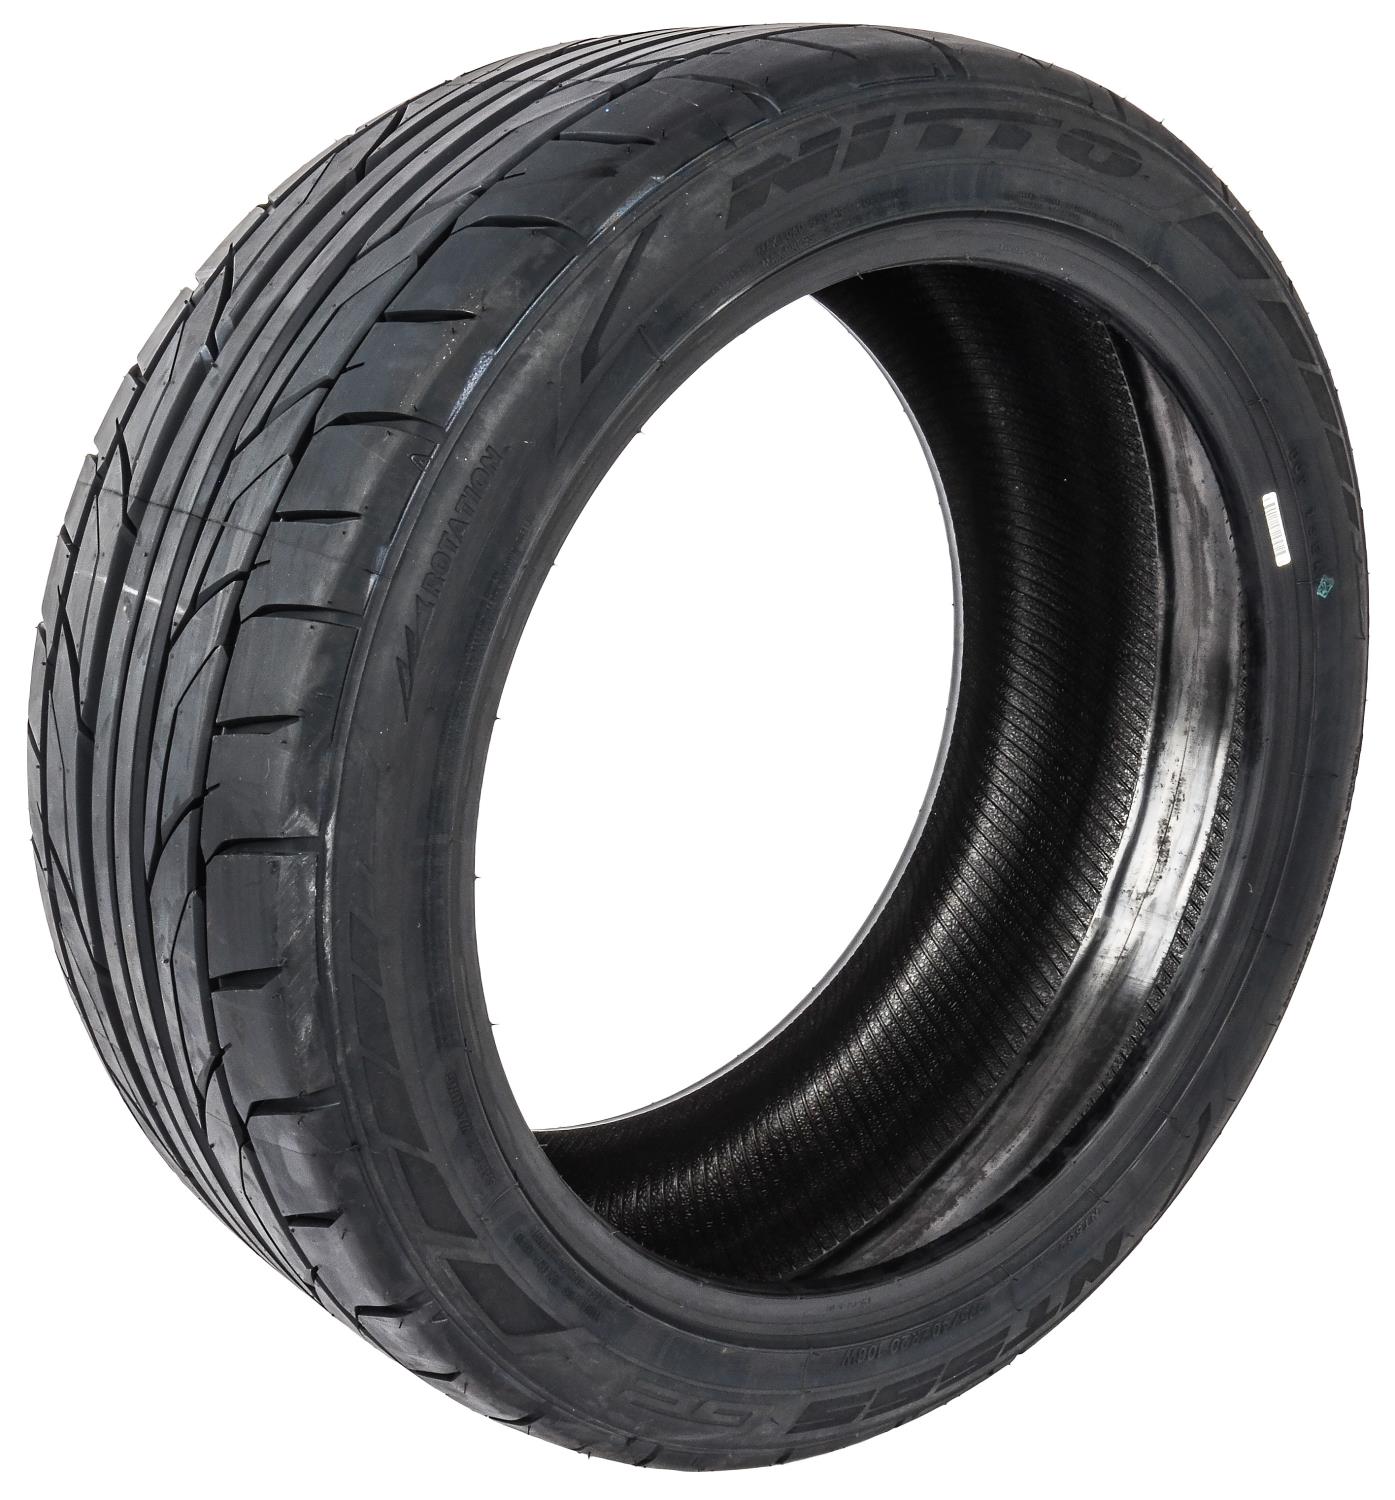 NT555 G2 Summer UHP Radial Tire 275/40R20